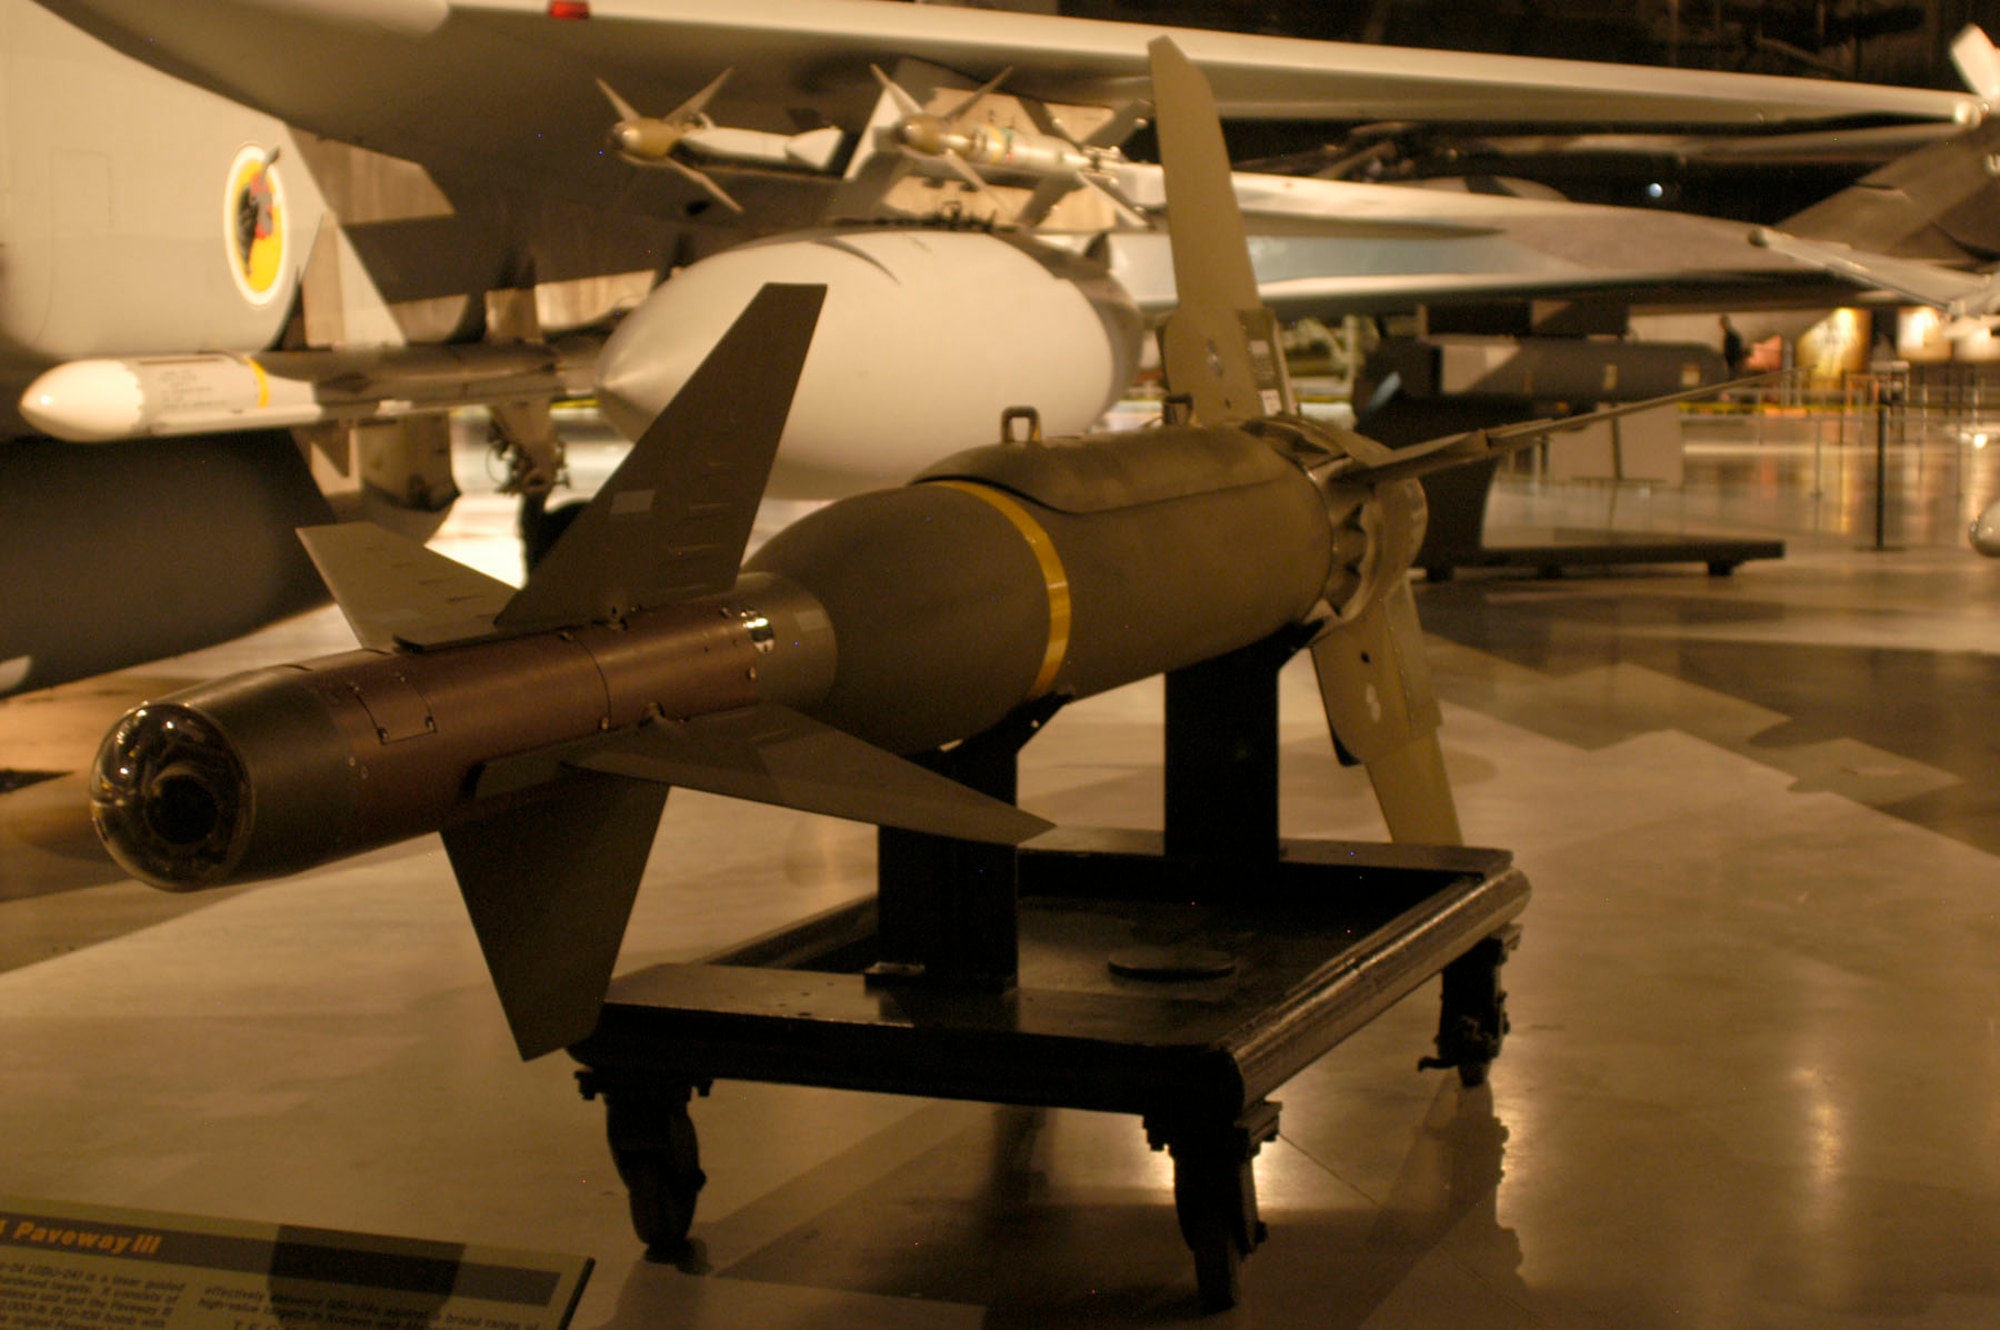 DAYTON, Ohio - The GBU-24 Paveway III on display in the Cold War Gallery at the National Museum of the U.S. Air Force. (U.S. Air Force photo)